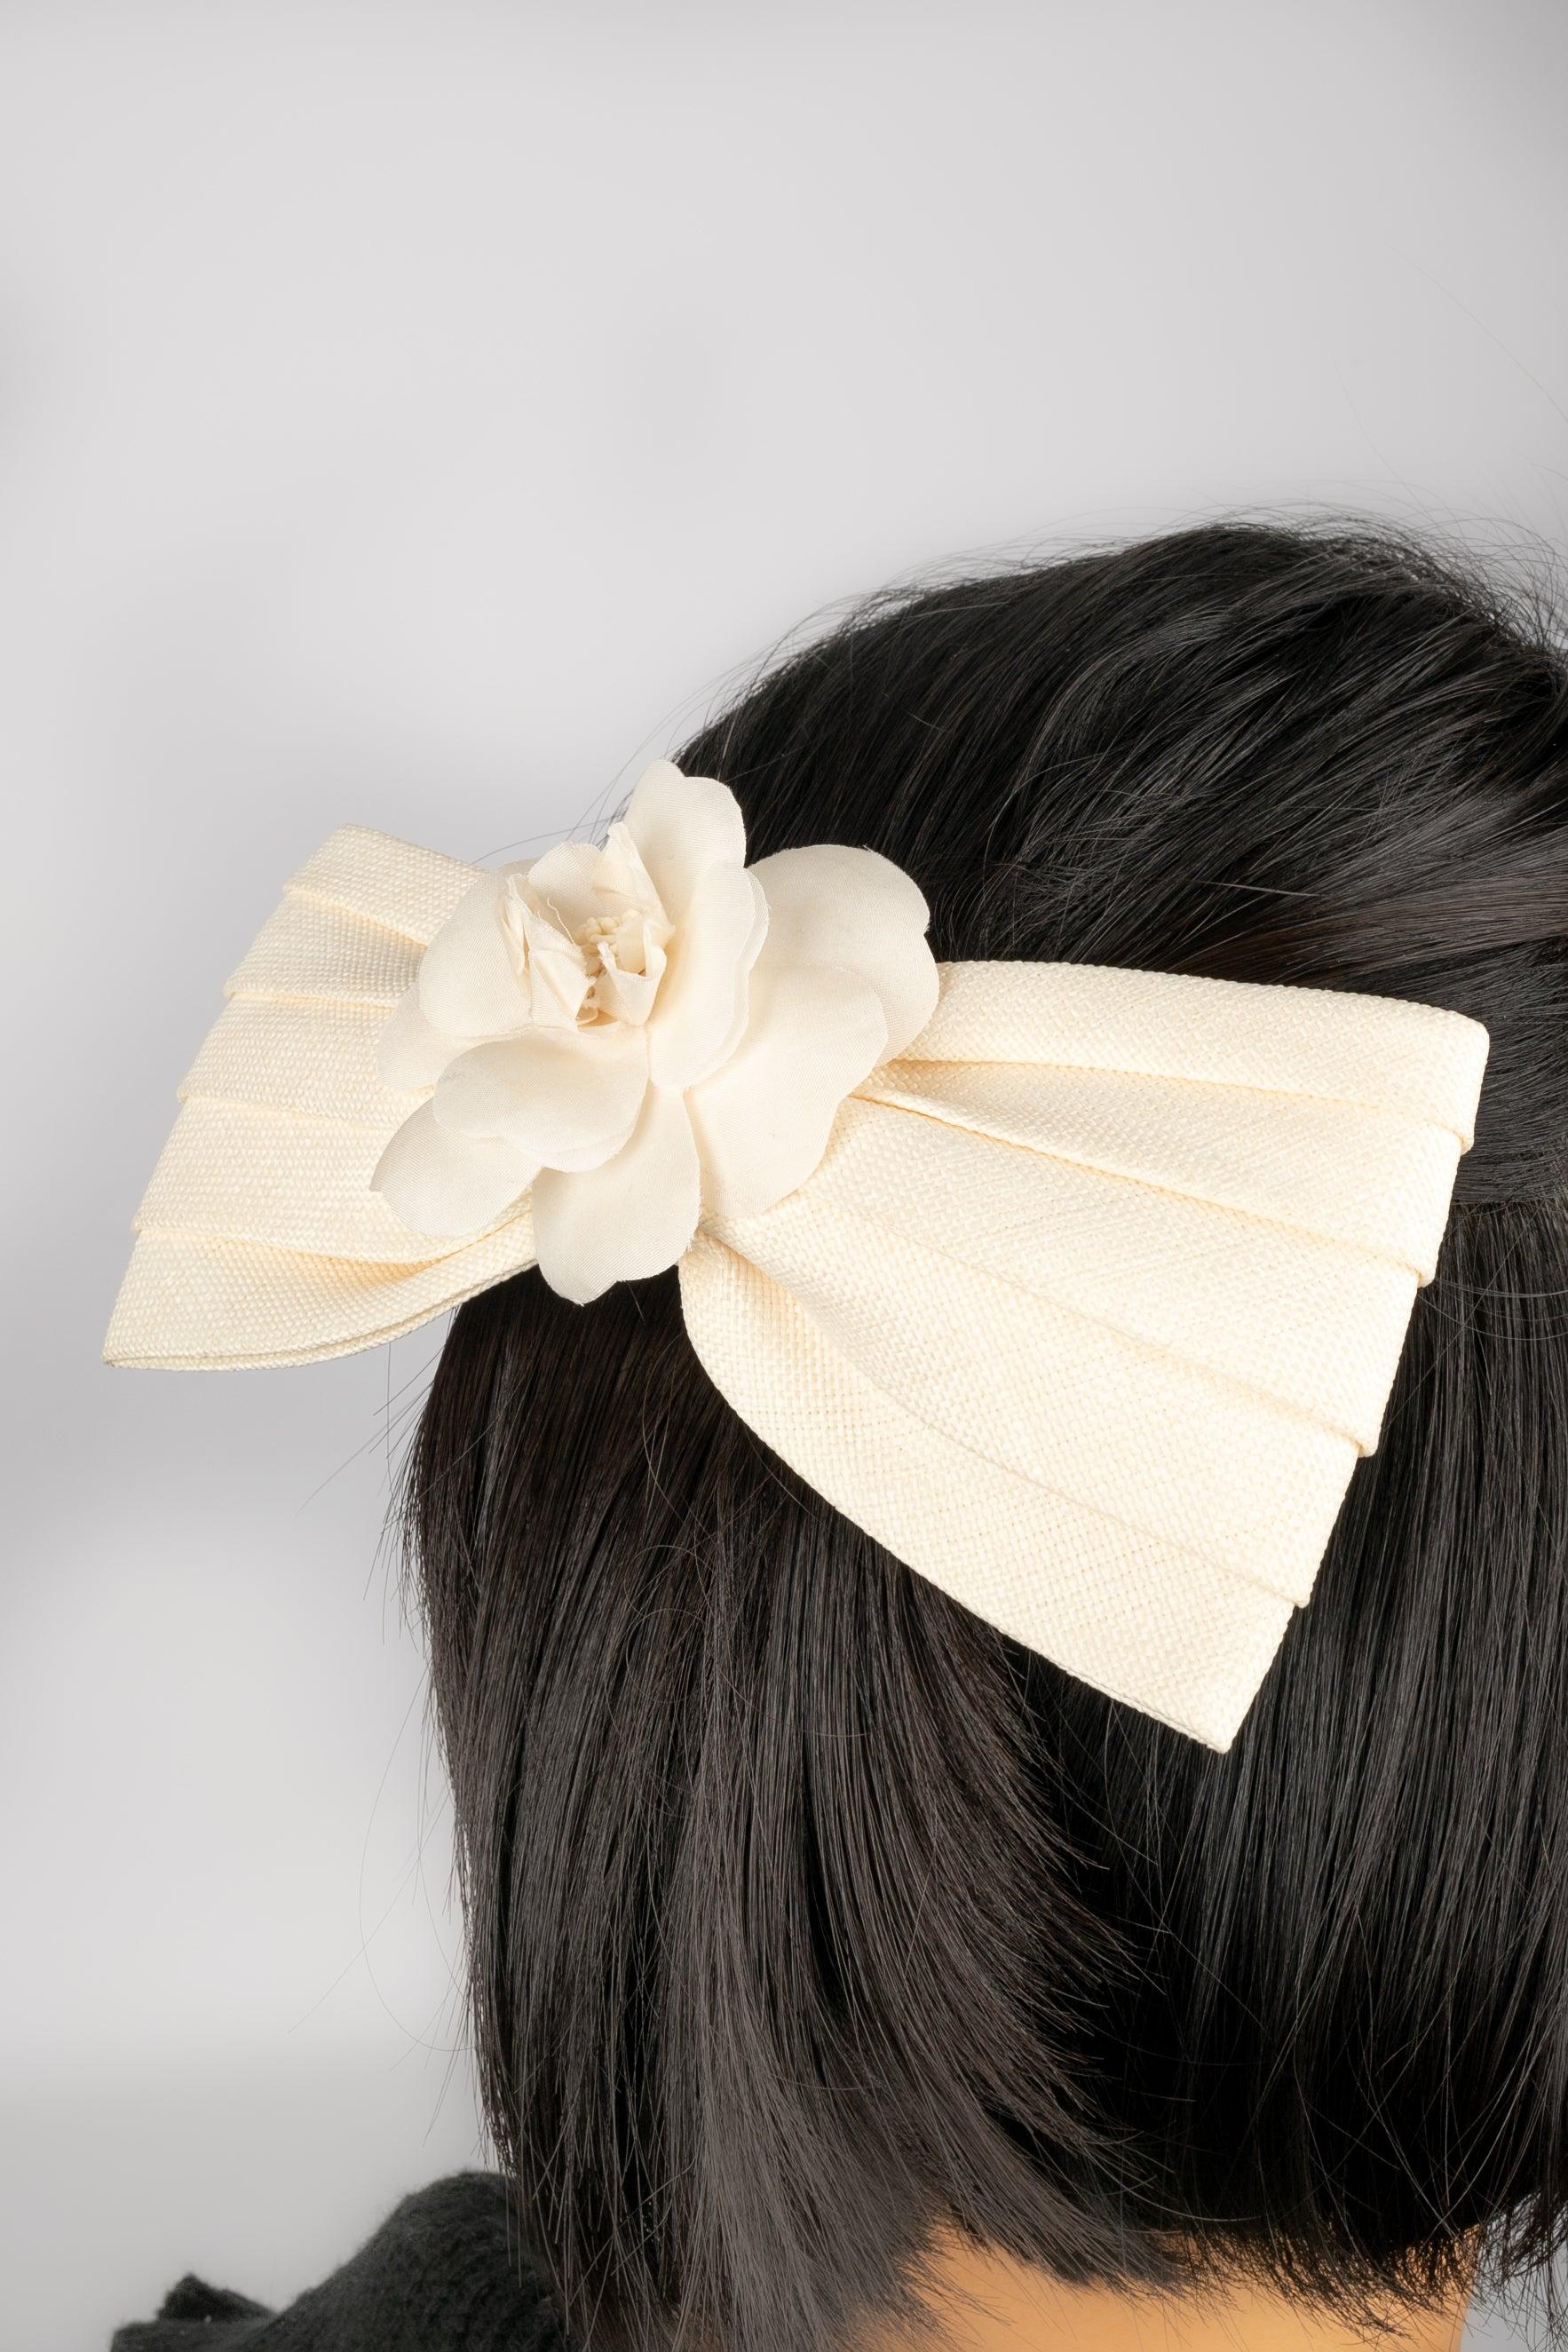 Chanel - (Made in France) Hair clip representing a cream color bow decorated with a camellia.
 
 Additional information: 
 Condition: Good condition
 Dimensions: Length: 18 cm
 
 Seller Reference: ACC16
